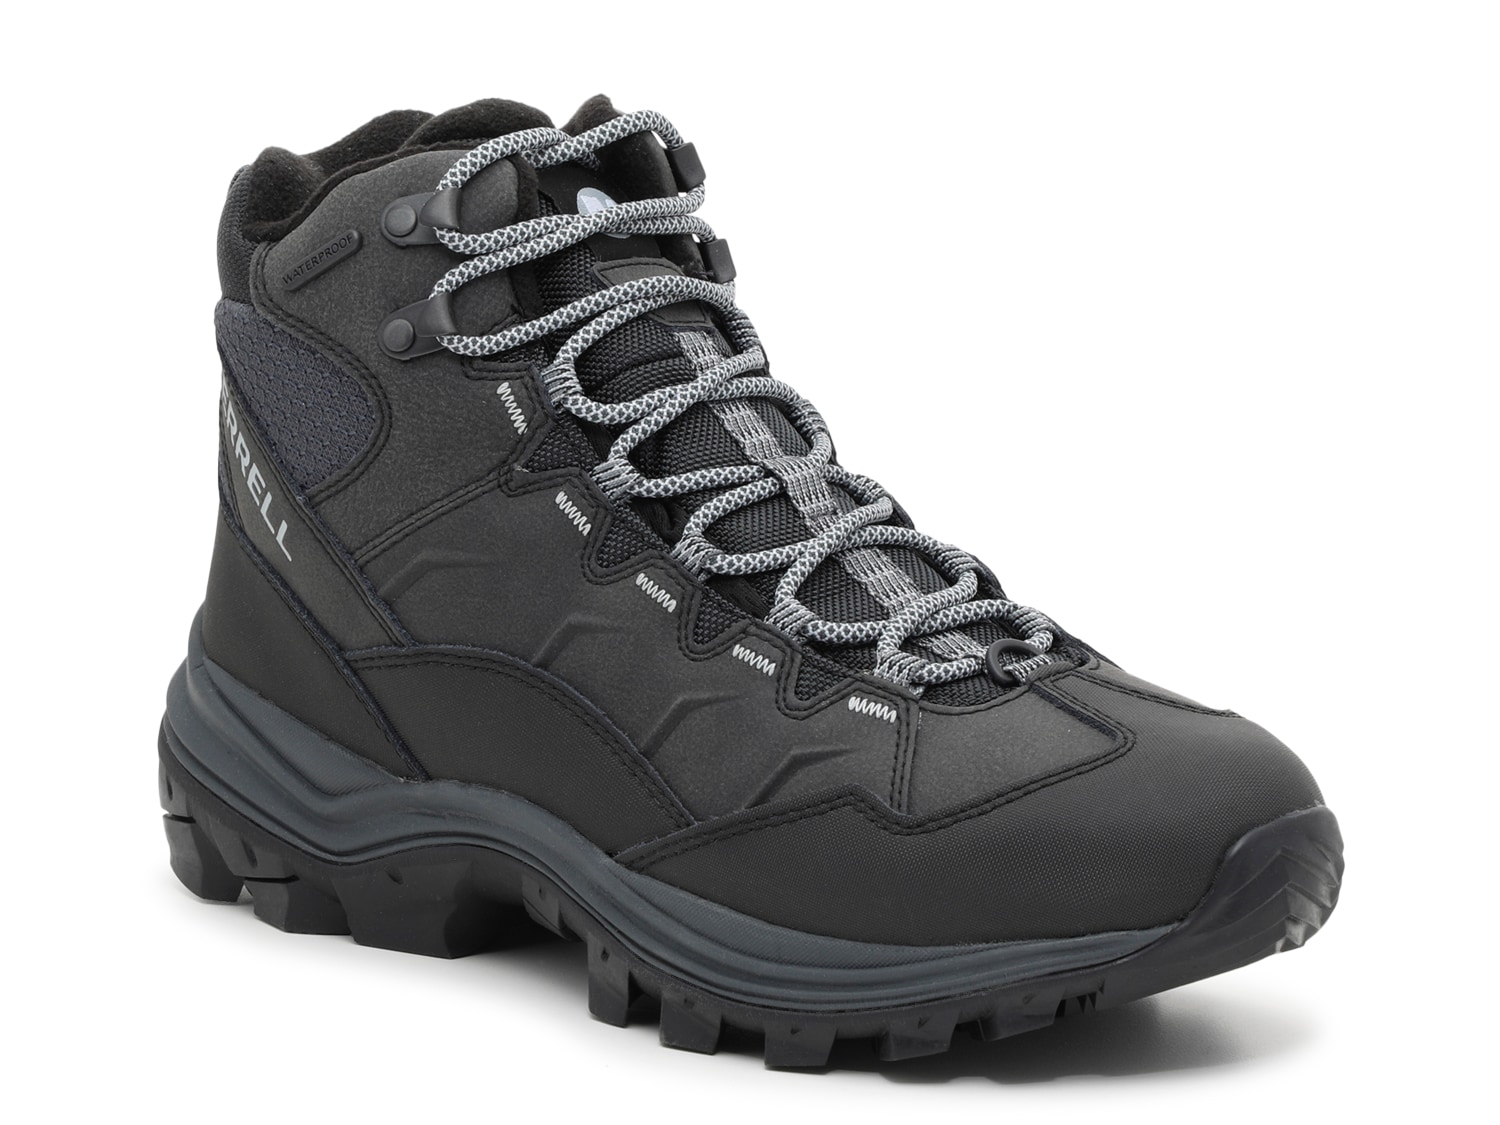 Merrell Men's Thermo Chill Mid Waterproof Cold Weather Lace-Up Boots